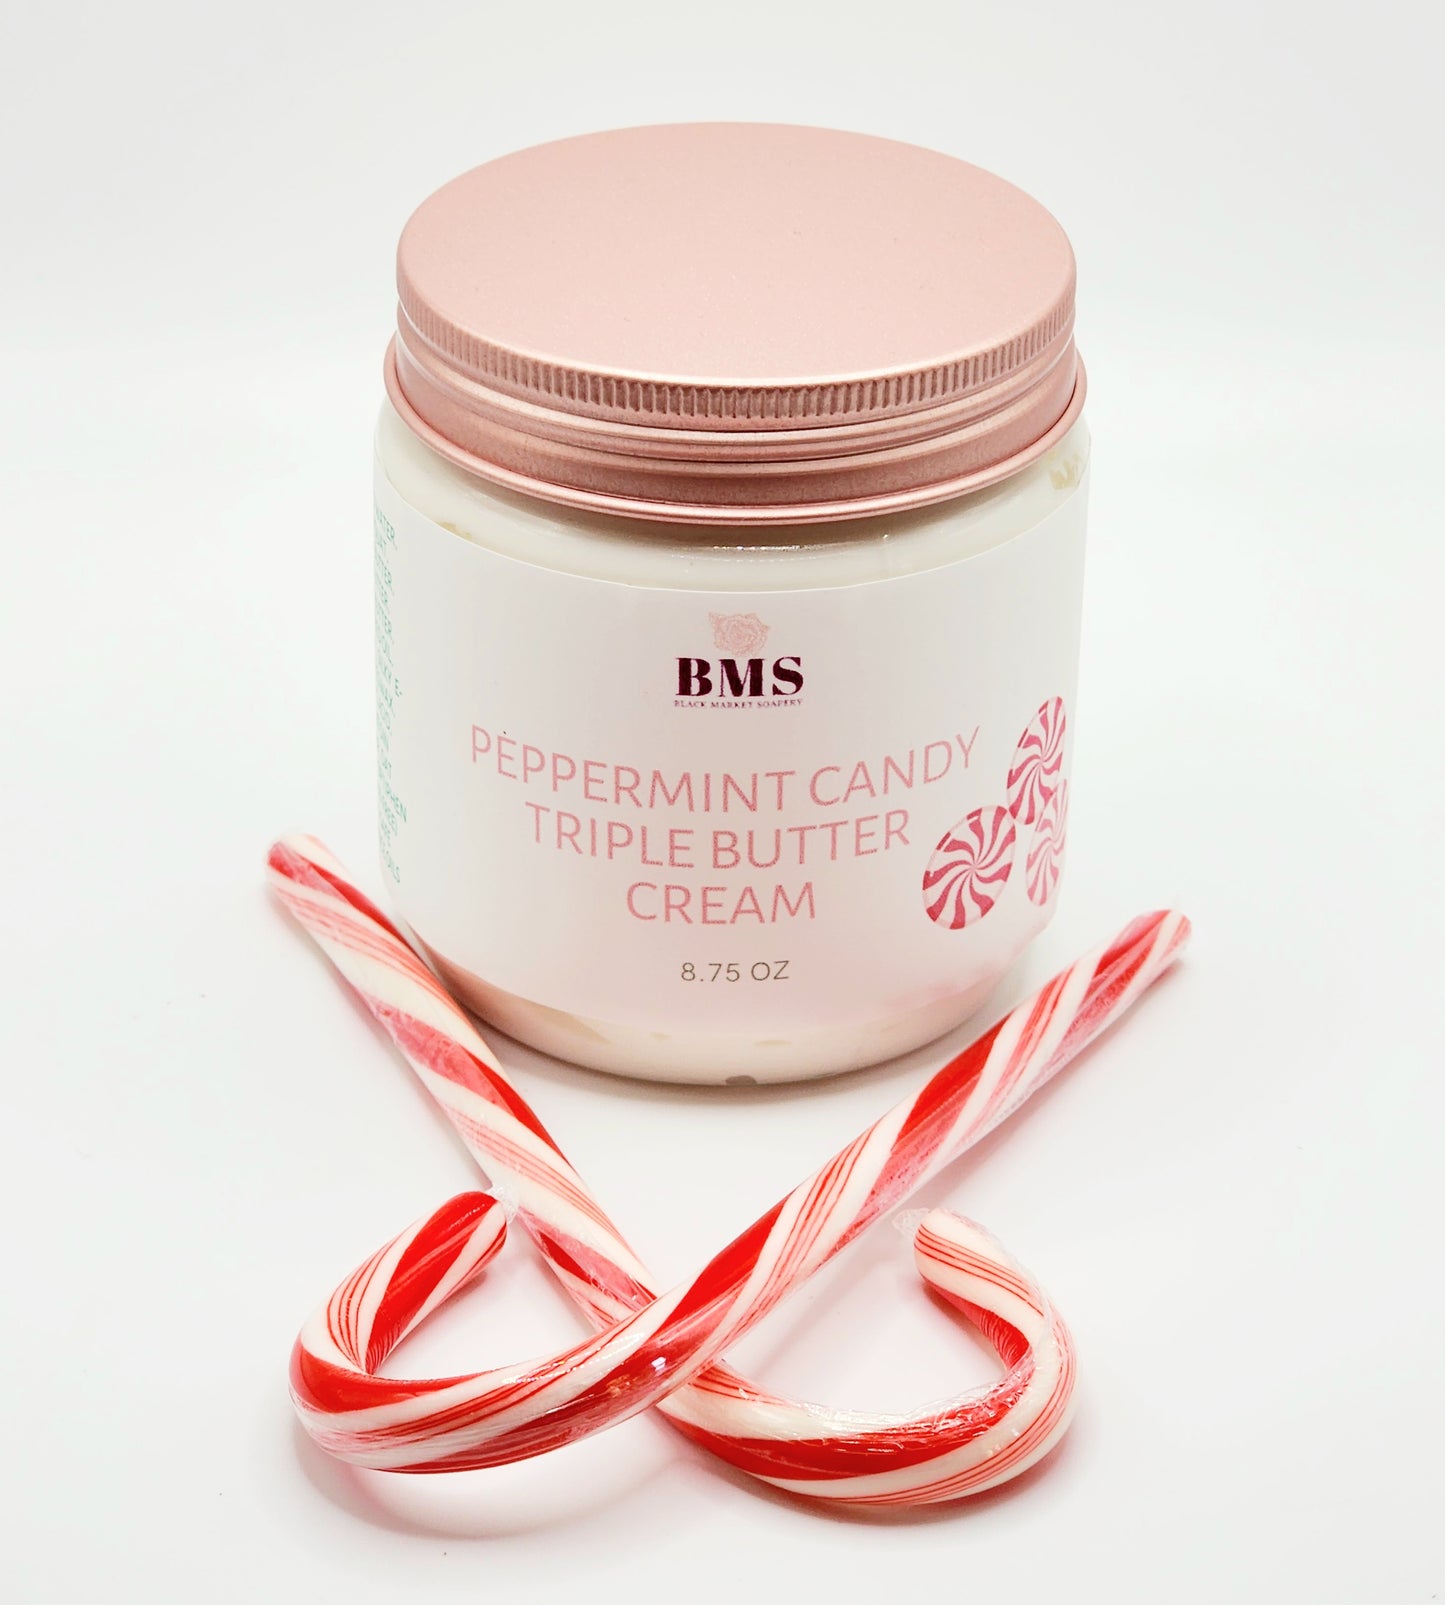 Large (8.75 OZ) Soothing Peppermint Candy Cream